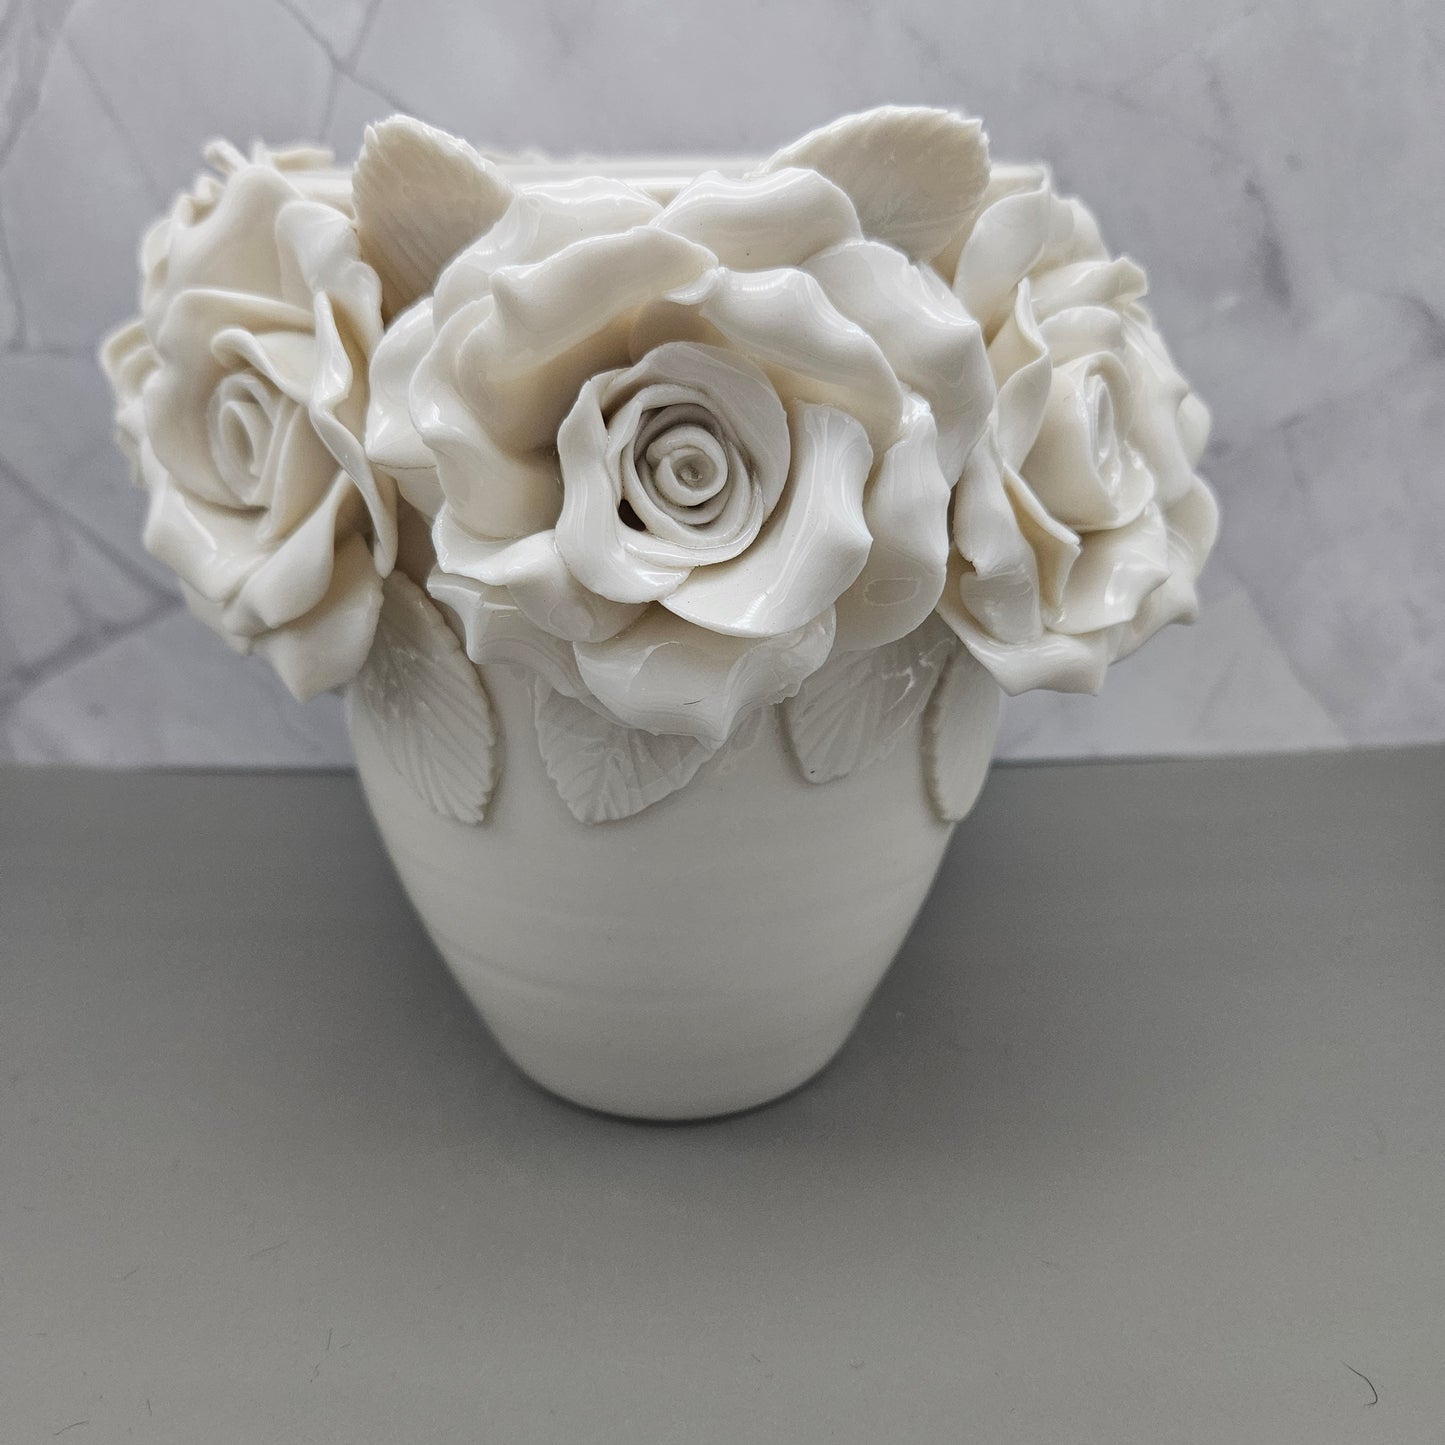 White frost 8 inch vases with roses